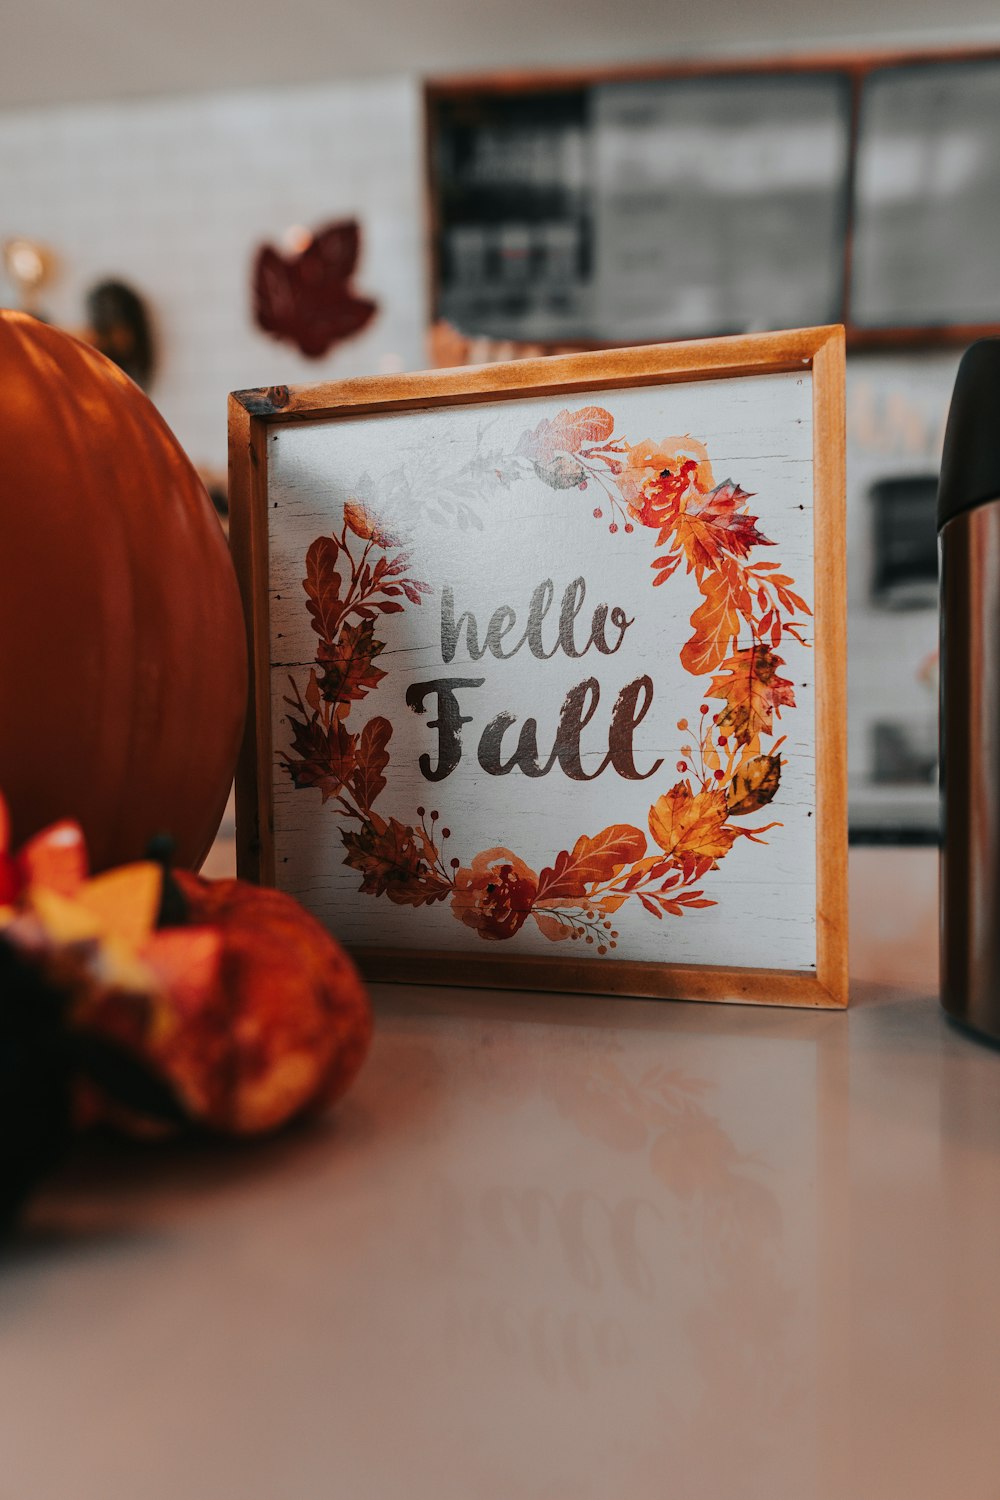 hello fall sign in frame on white surface